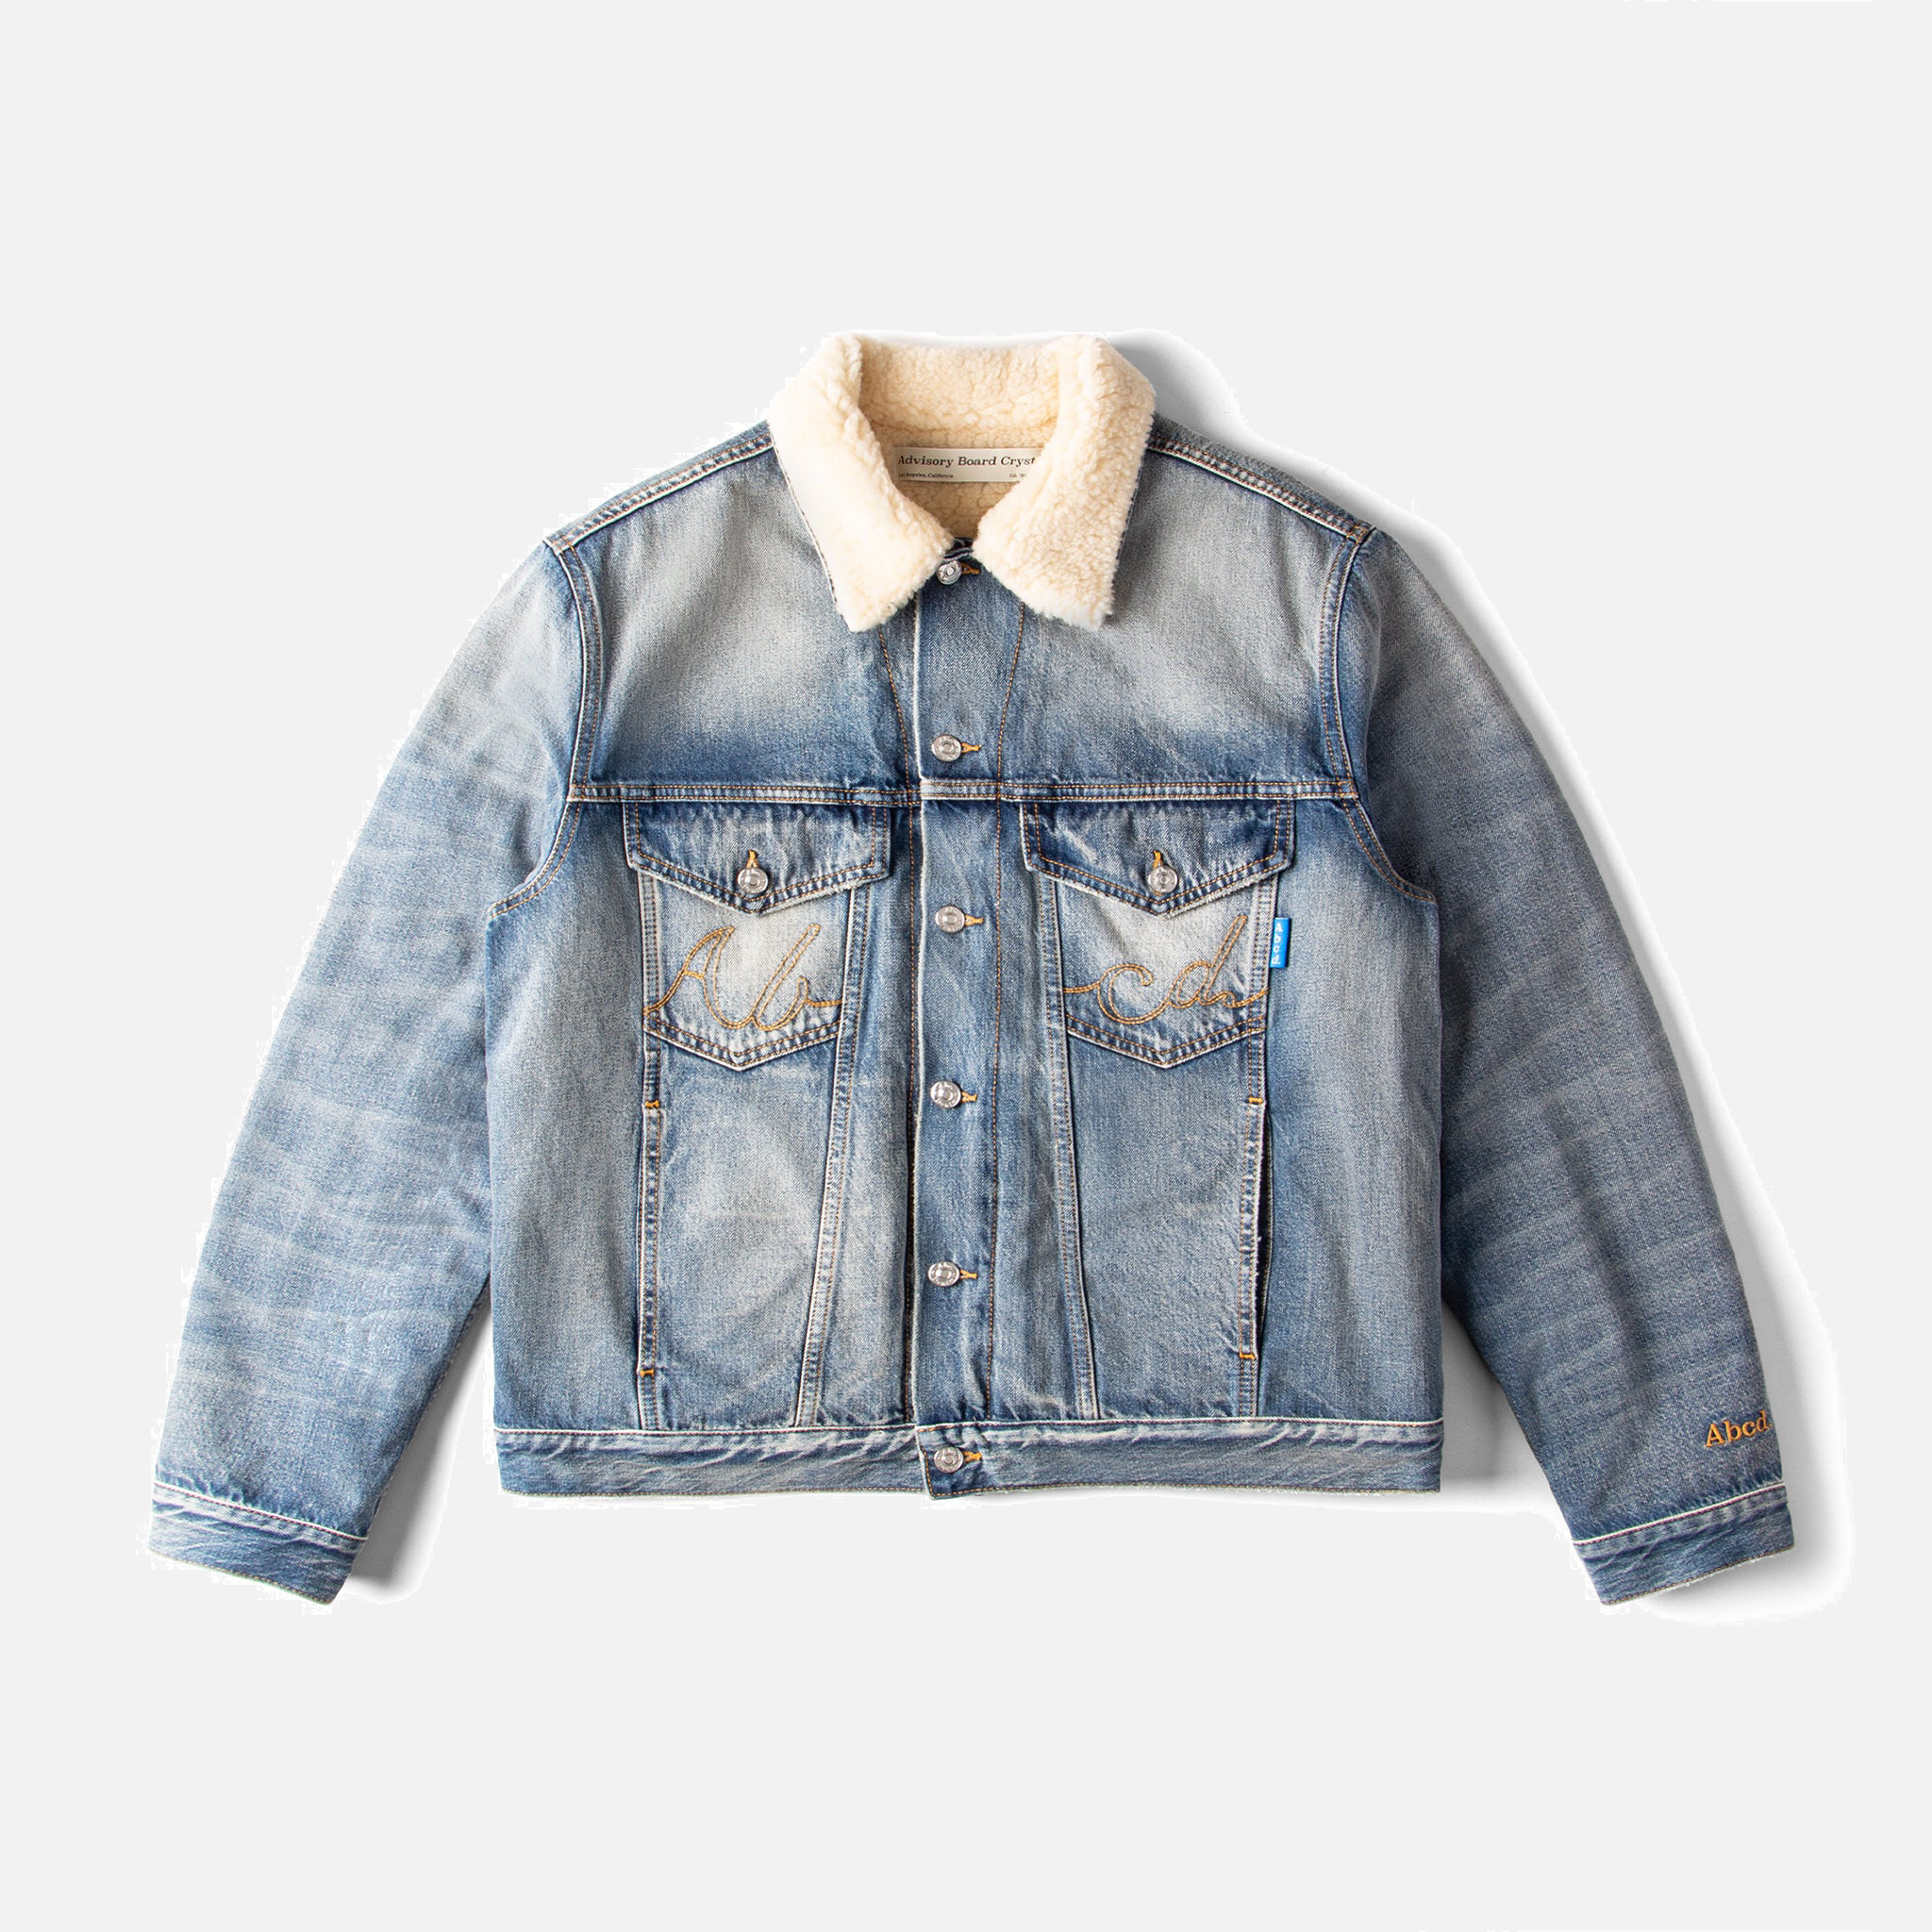 ABCD. CLIFF BOOTH SHEARLING LINED JEAN JACKET - SUPER FADED BLUE